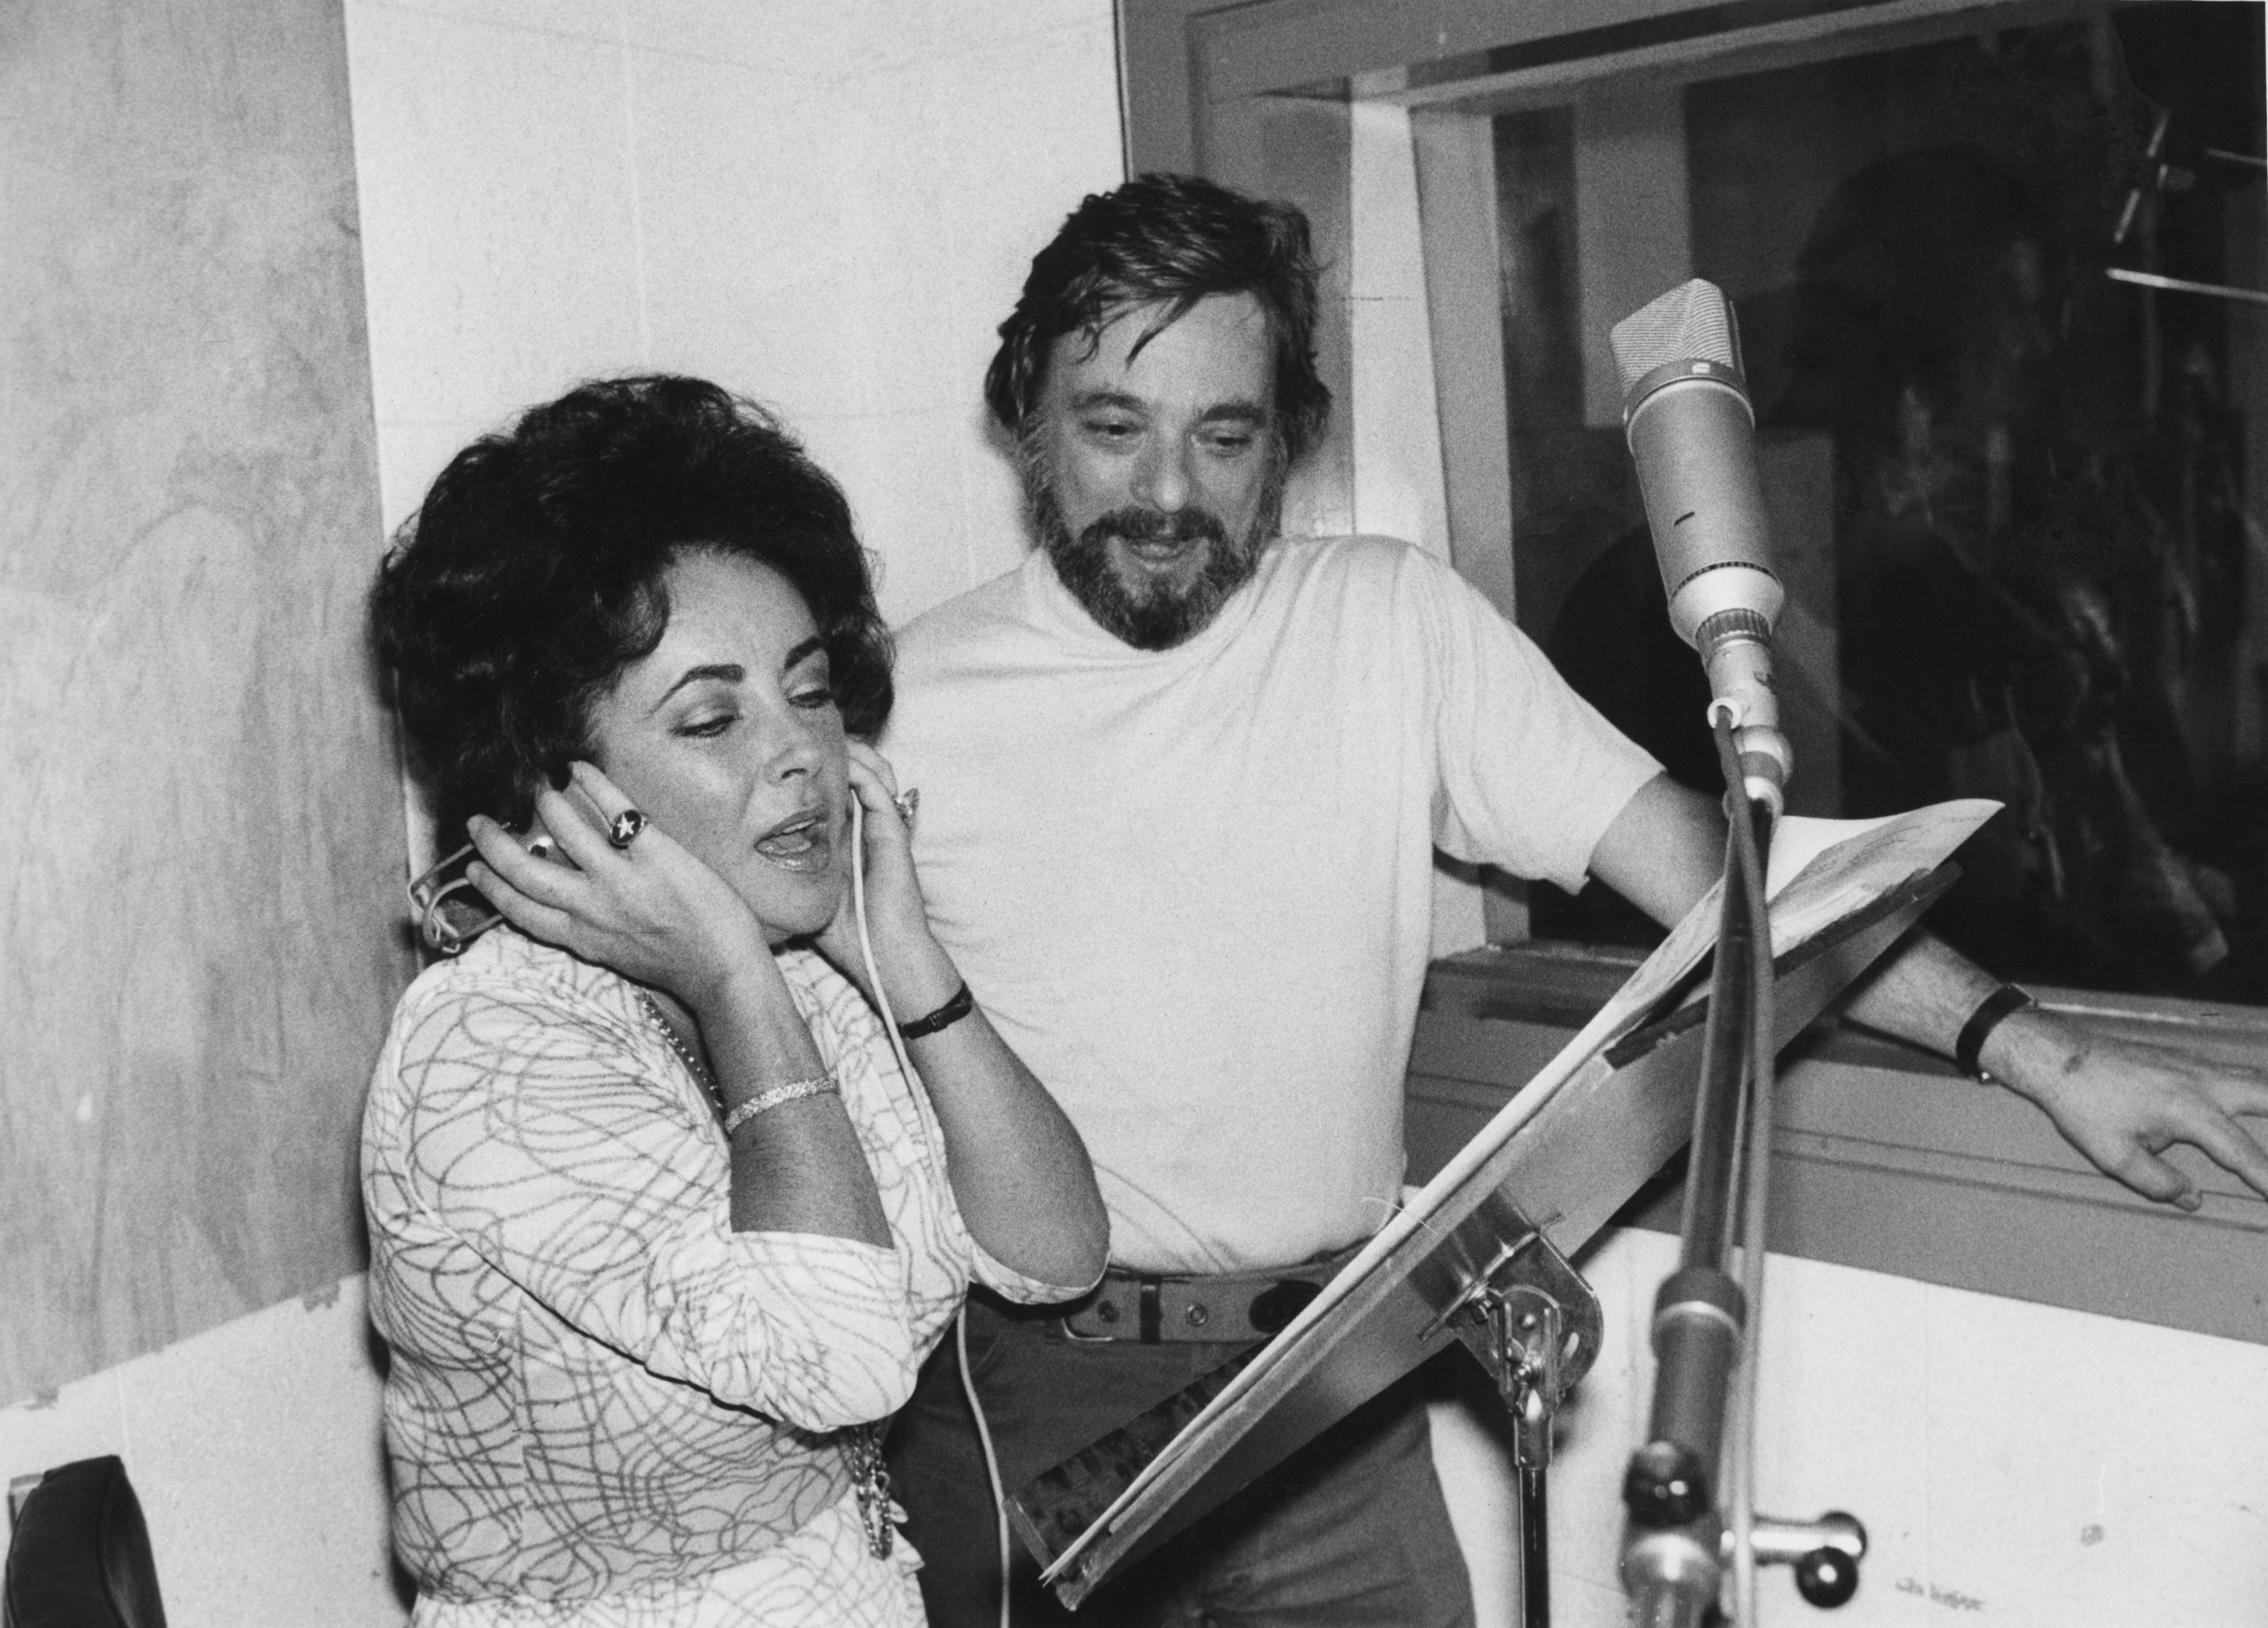 Elizabeth Taylor singing while looking at music with Stephen Sondheim next to her